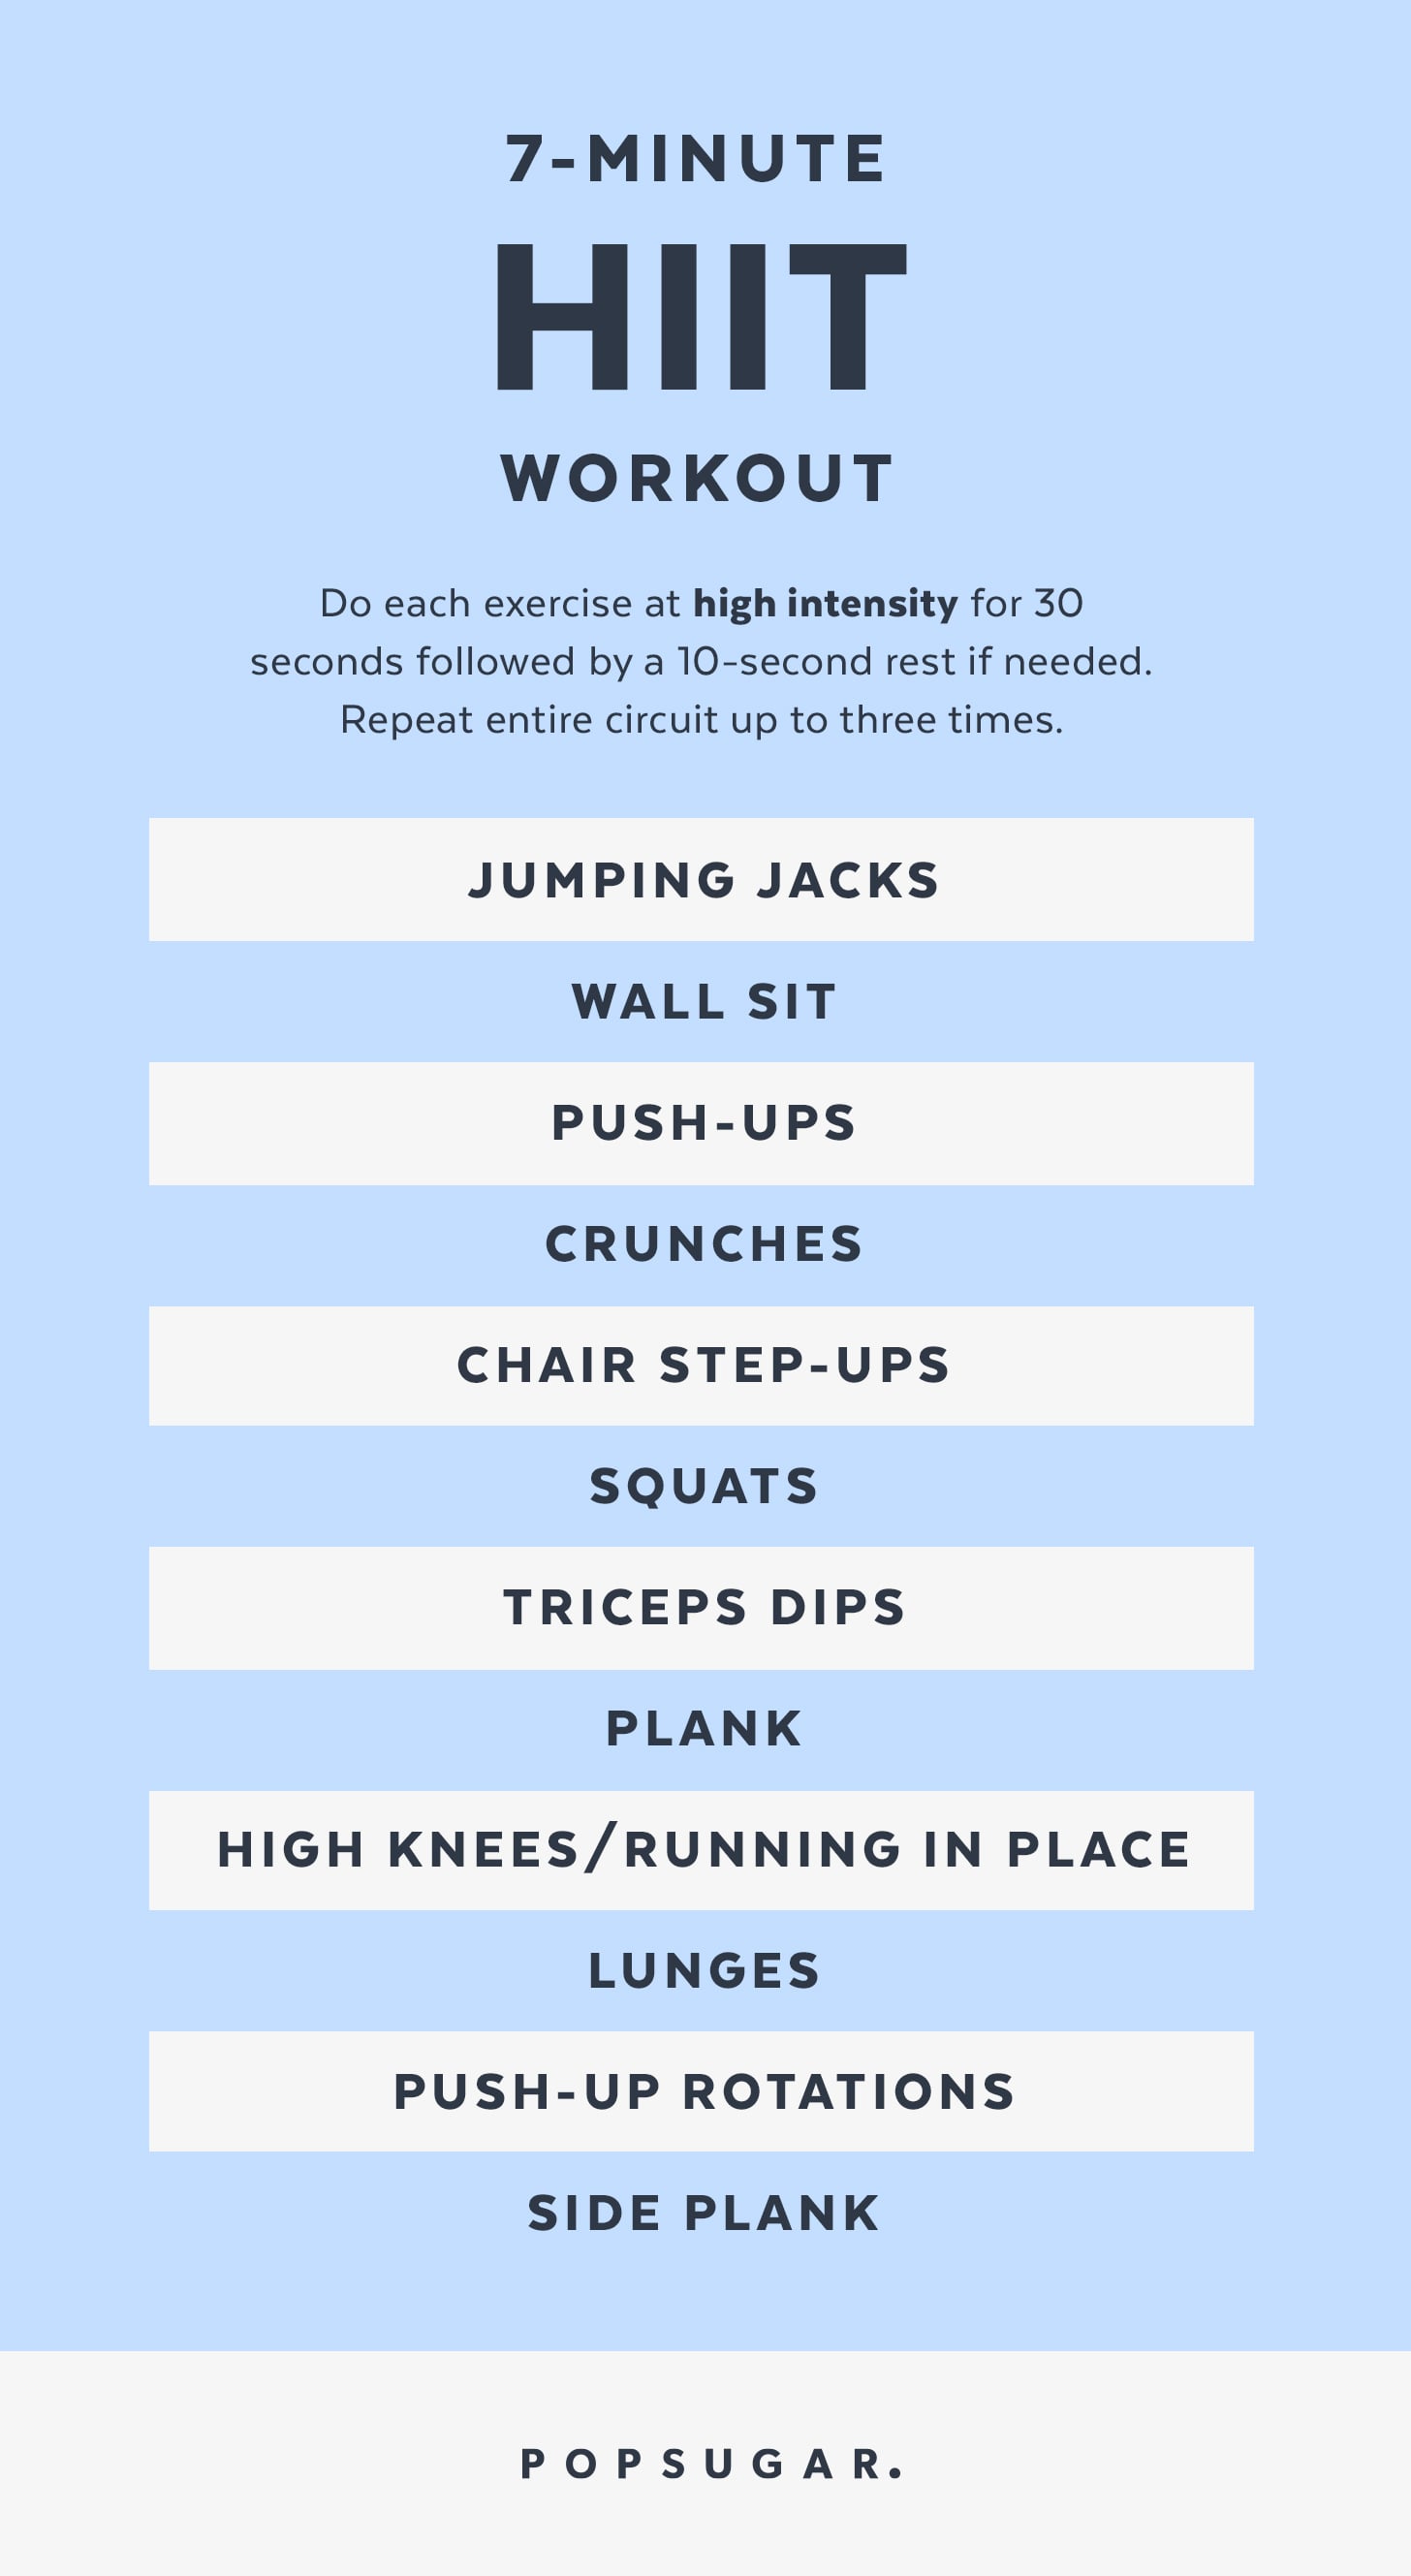 High-intensity workouts